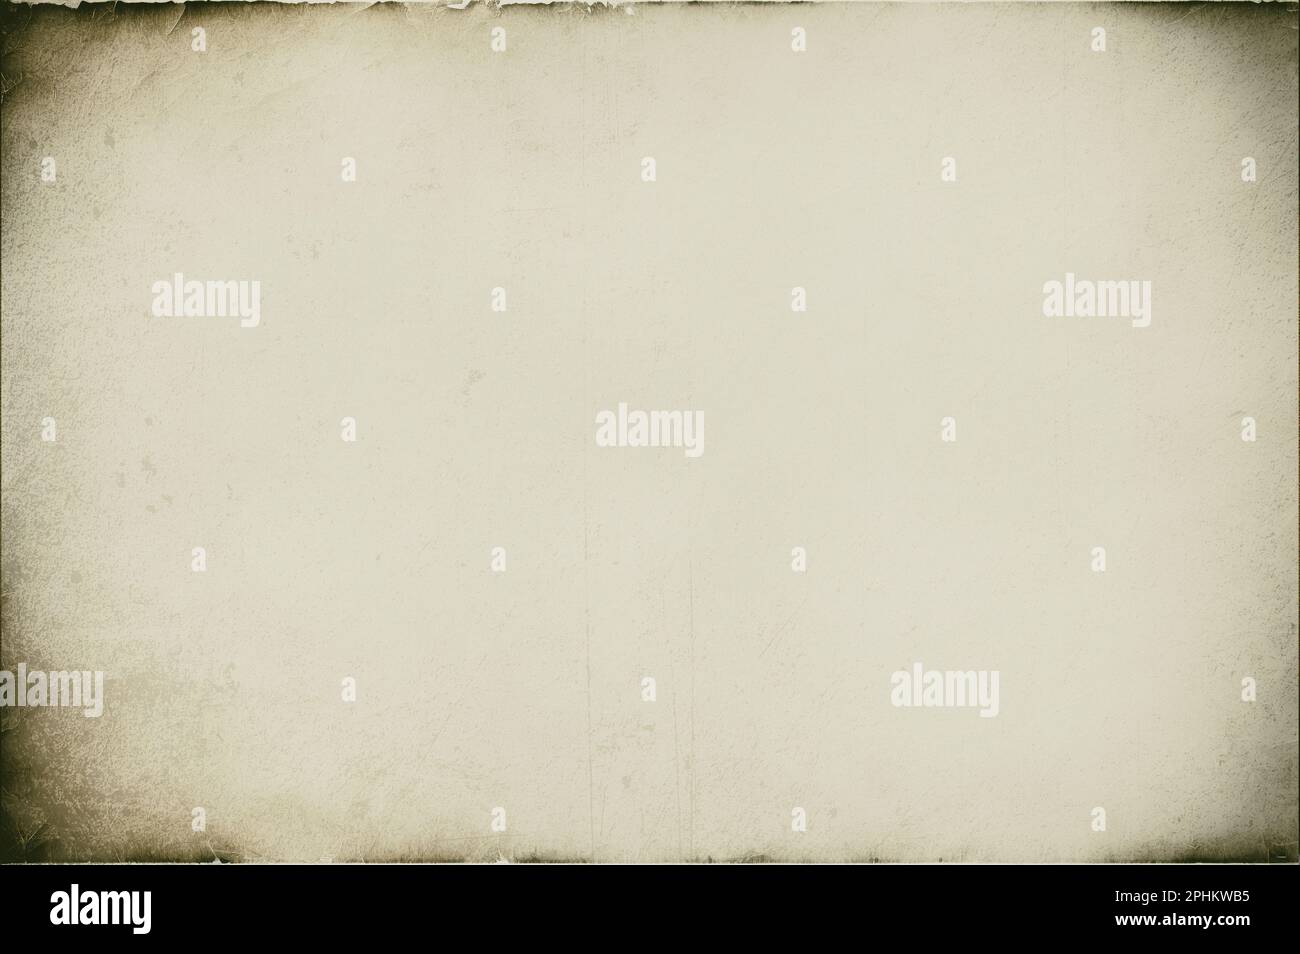 Grunge style old texture with scratches background for backdrop overlay Stock Photo